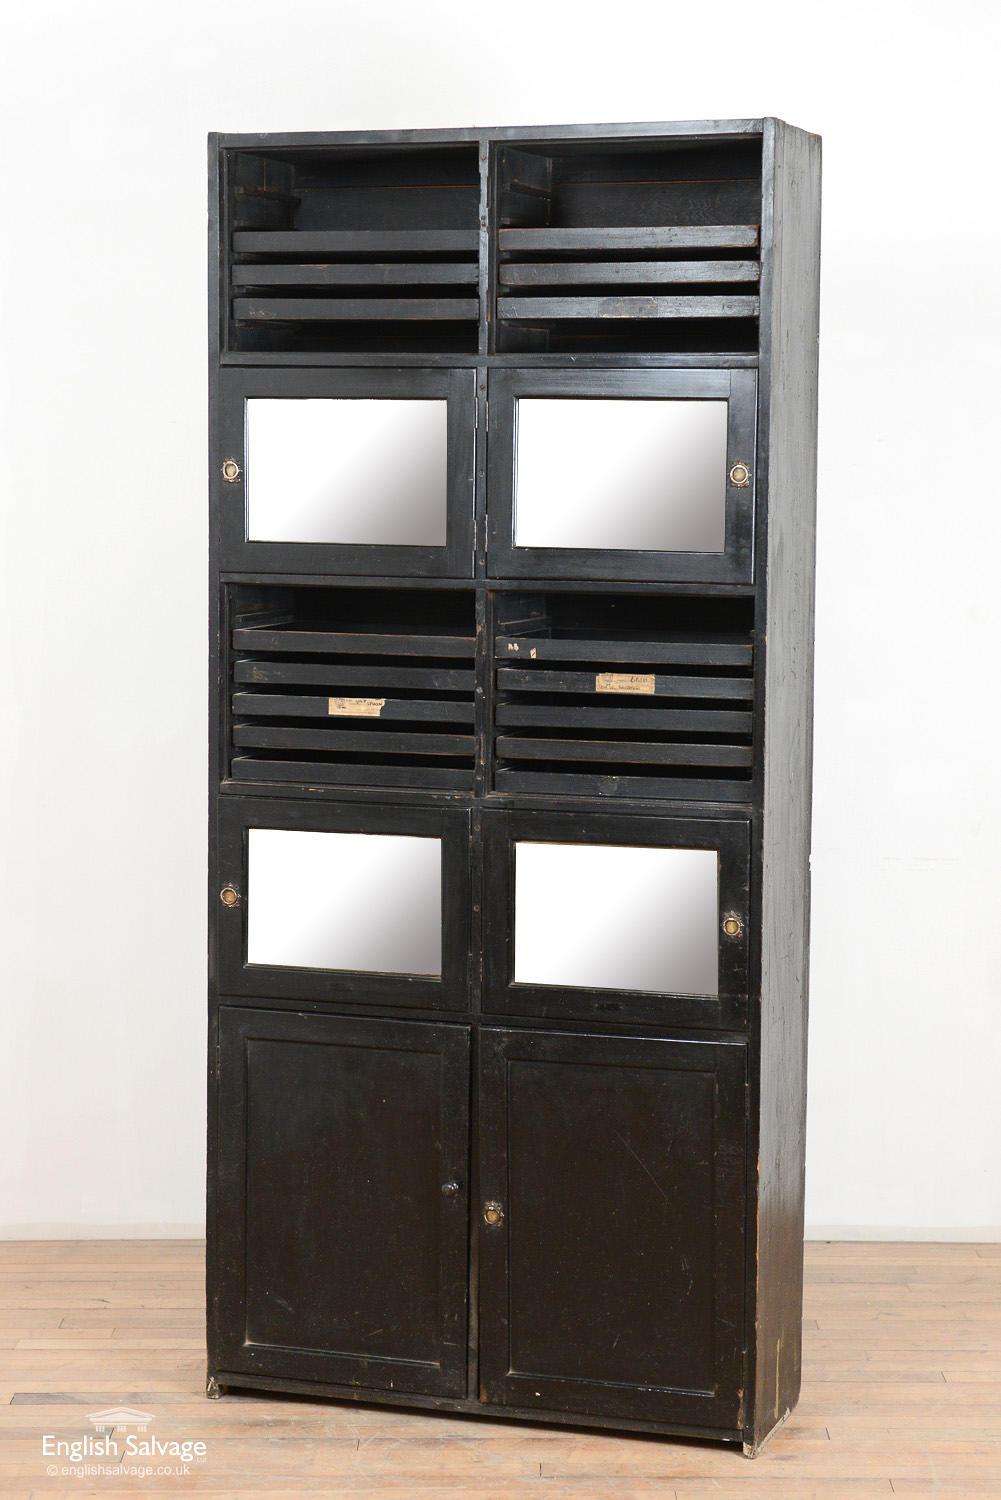 Unusual shop fitting display cupboard for jewelry or silverware. The black painted cabinet has two sets of mirrored doors, unusually hinged to open from the center of the cabinet rather than the edge. The lower cupboard doors are hinged at the edge